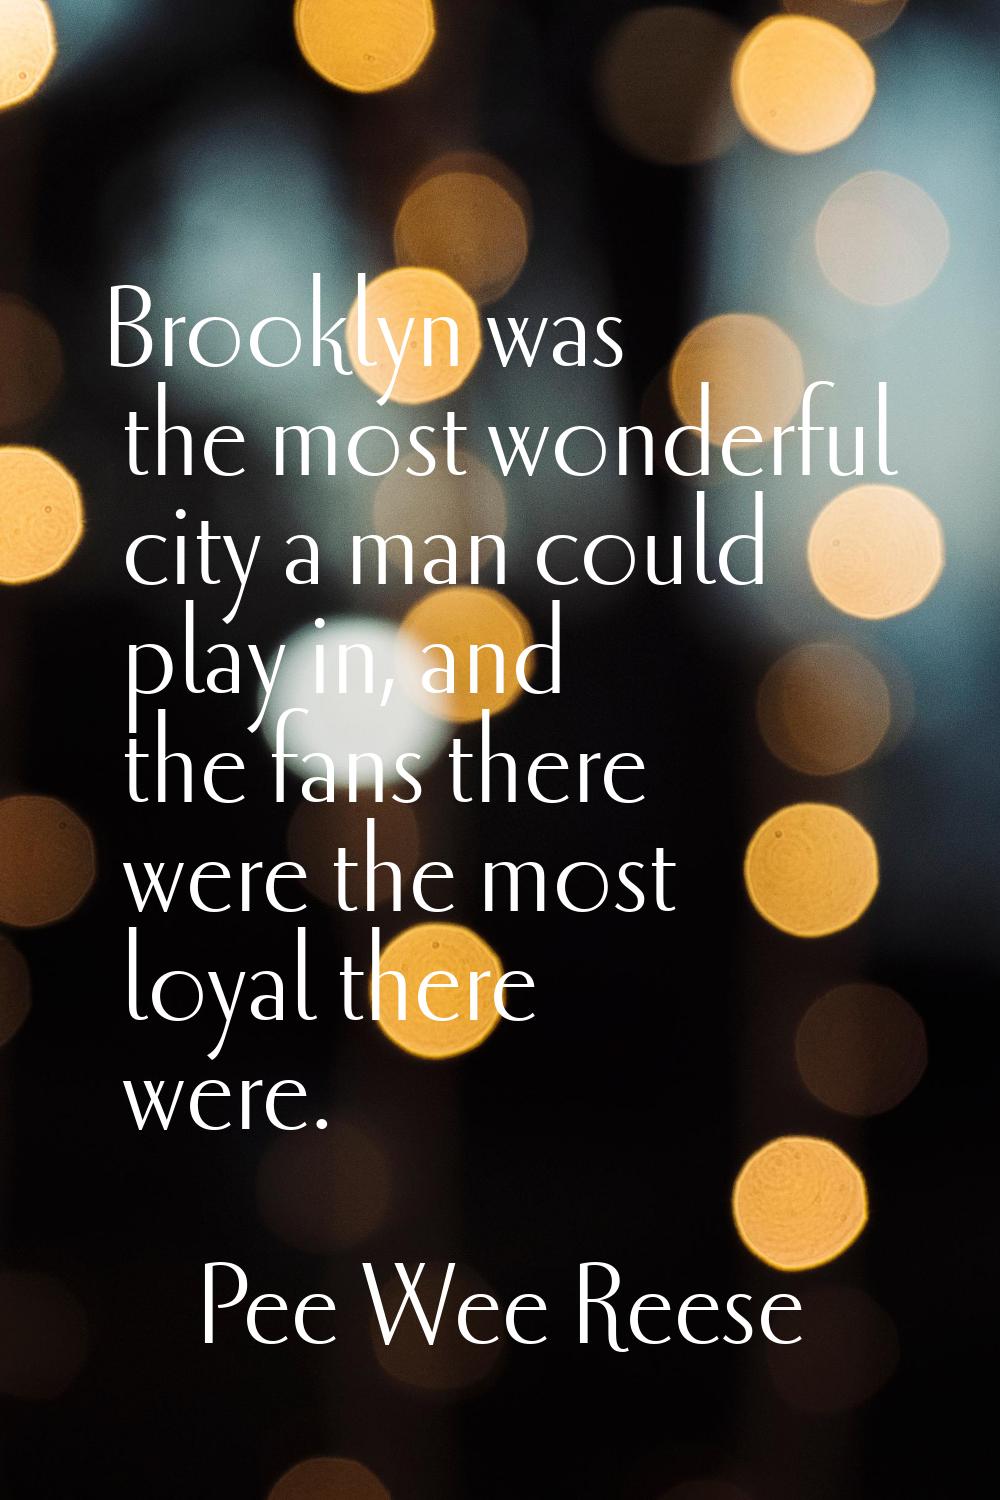 Brooklyn was the most wonderful city a man could play in, and the fans there were the most loyal th